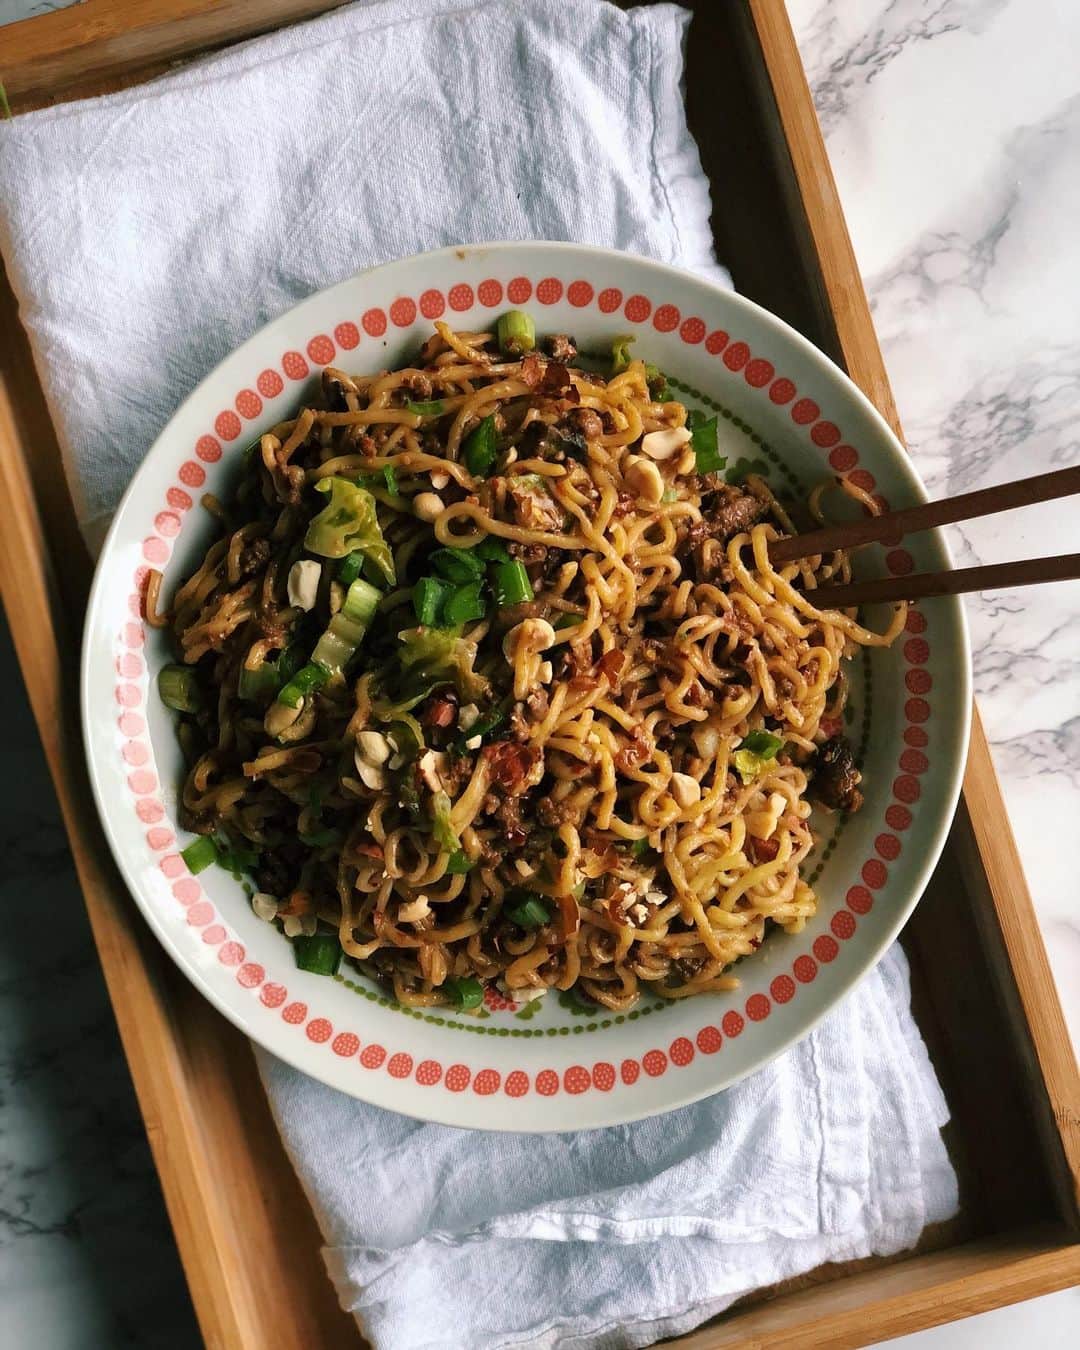 Antonietteのインスタグラム：「Was wanting dan dan noodles but didn’t have Sichuan chili oil or sesame paste, so ended up making those first. Was well worth it! Only had romaine lettuce which I ended up sautéing into the dish and used fresh ramen noodles. The heat of the Sichuan peppercorn chili oil and nuttiness of the sesame paste turned this dan dan noodle dish to something dan-g dan-g good! 😋 Recipe from @thewoksoflife. #quarantinecuisine」